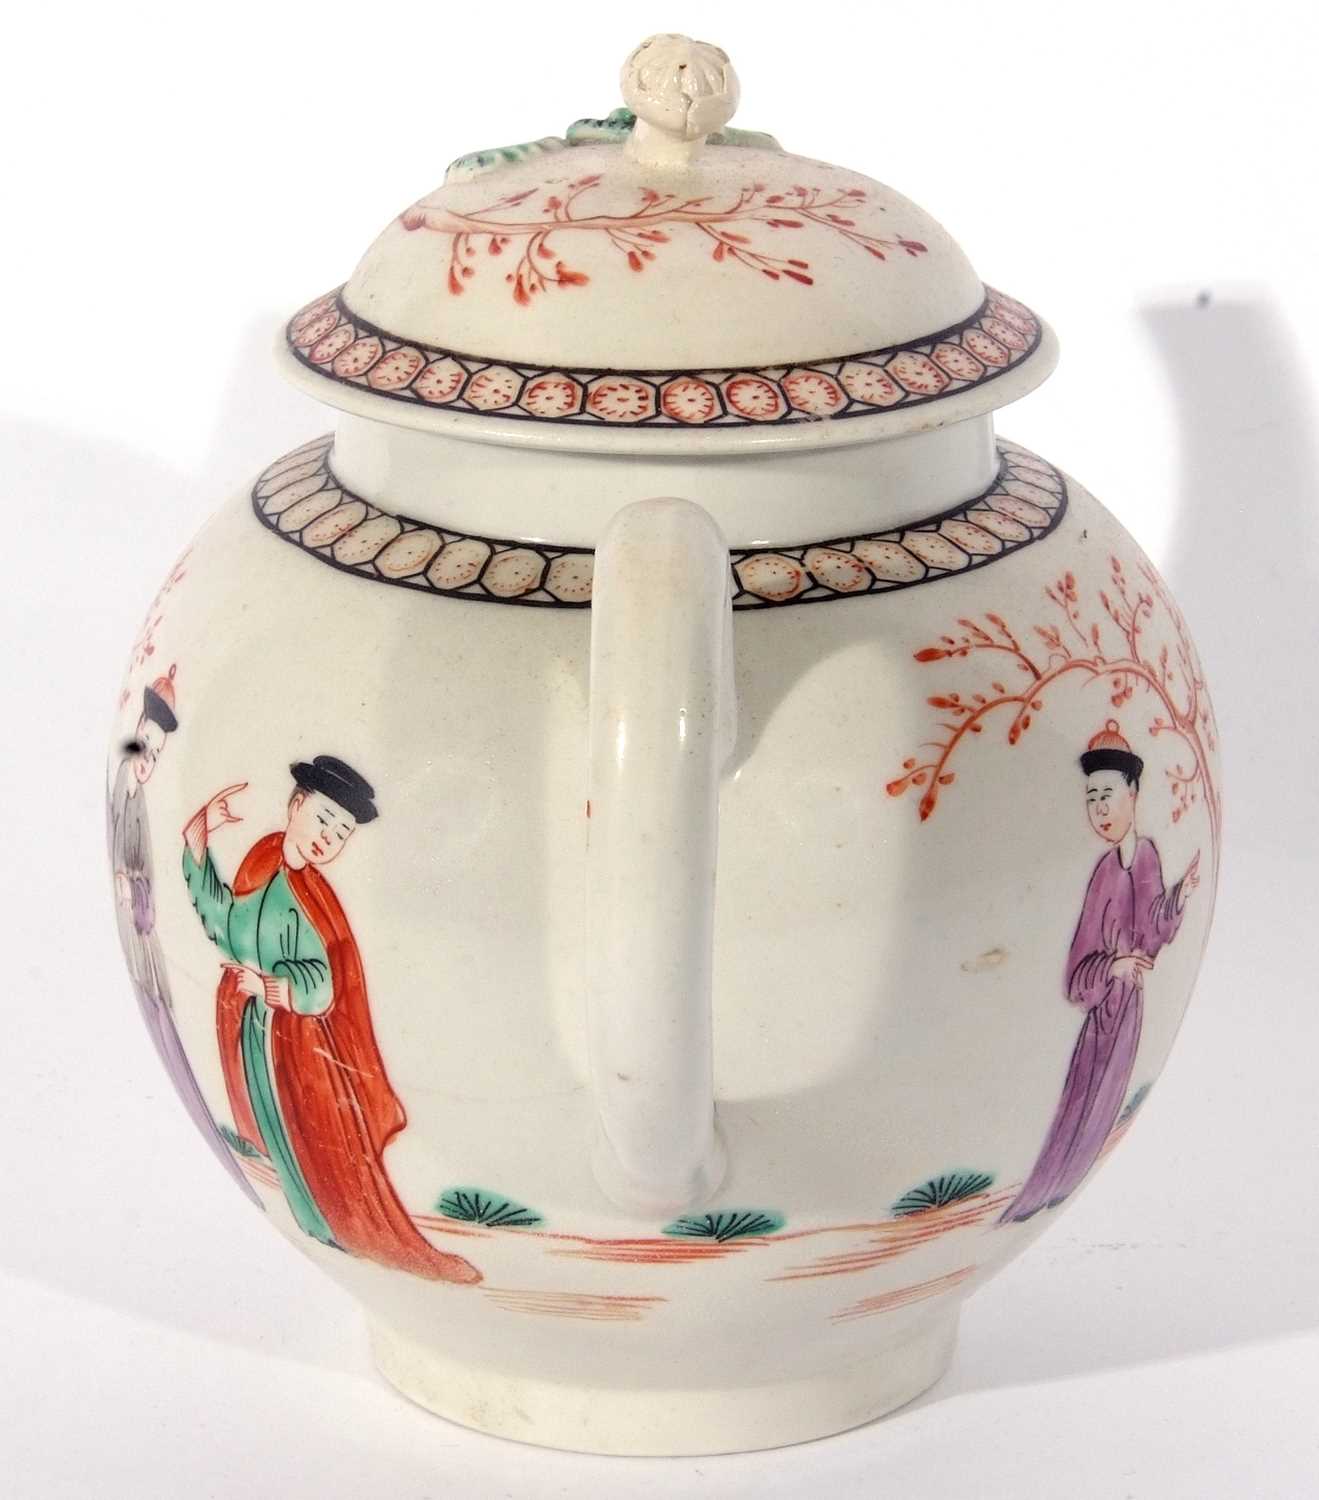 Lowestoft porcelain tea pot, circa 1780, with a polychrome design of Chinese figures by a tree, - Image 8 of 8